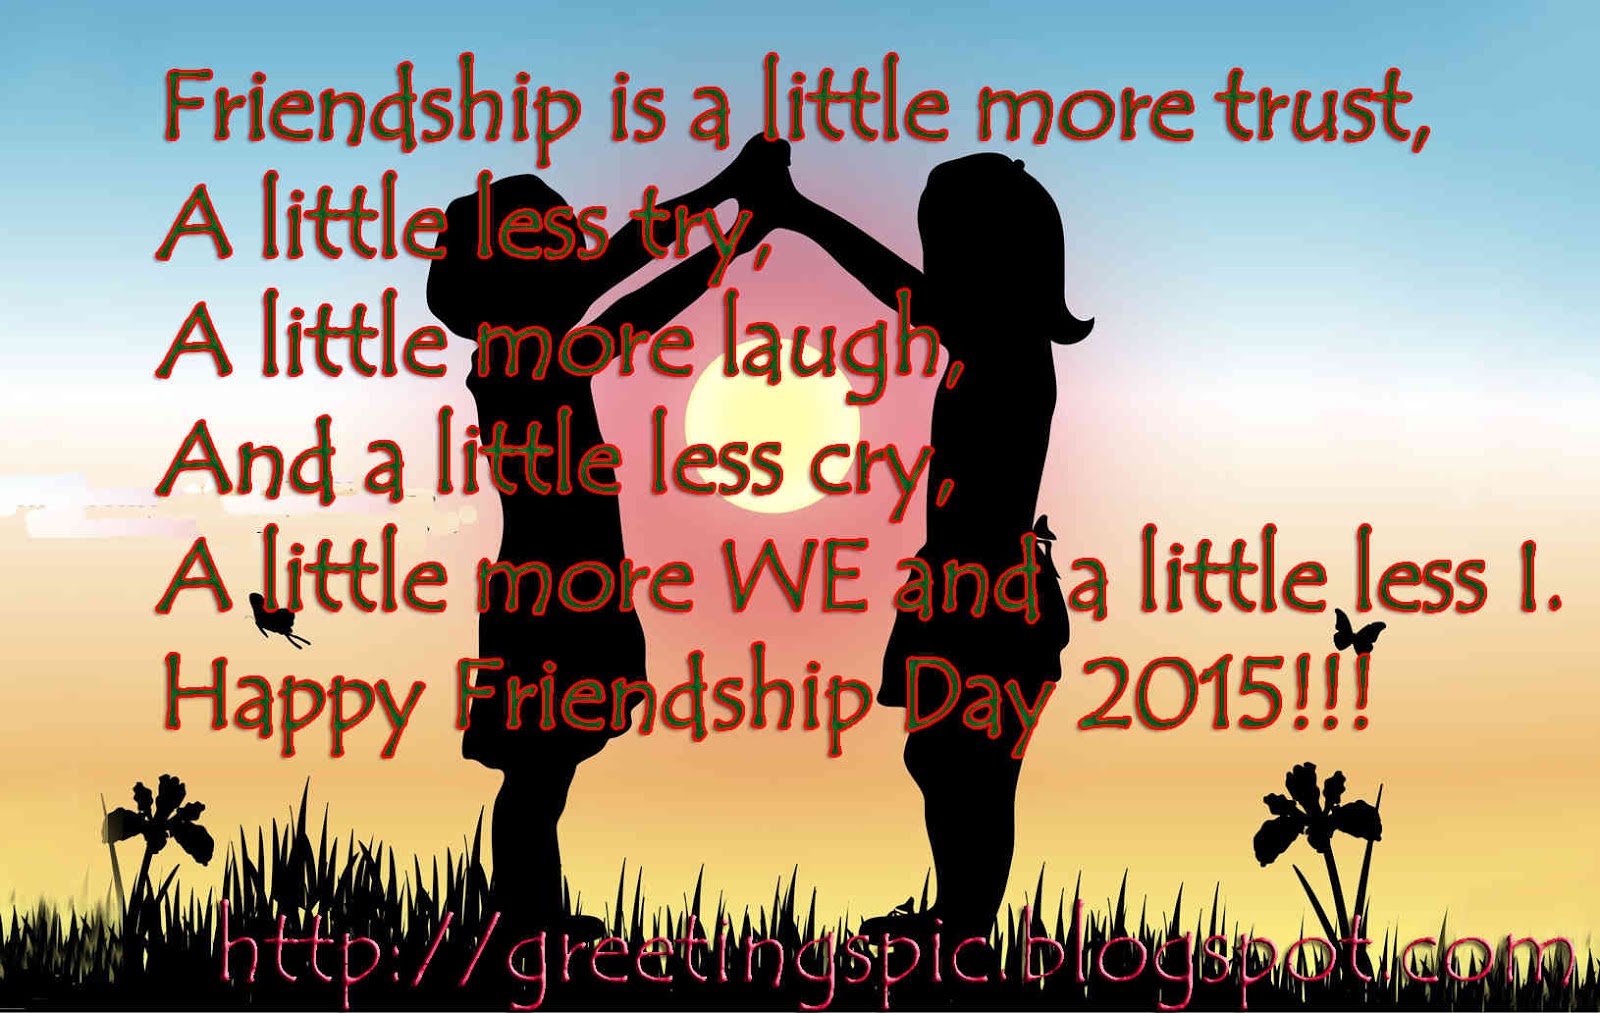 Friendship day quotes with photos ~ Greetings Wishes Images